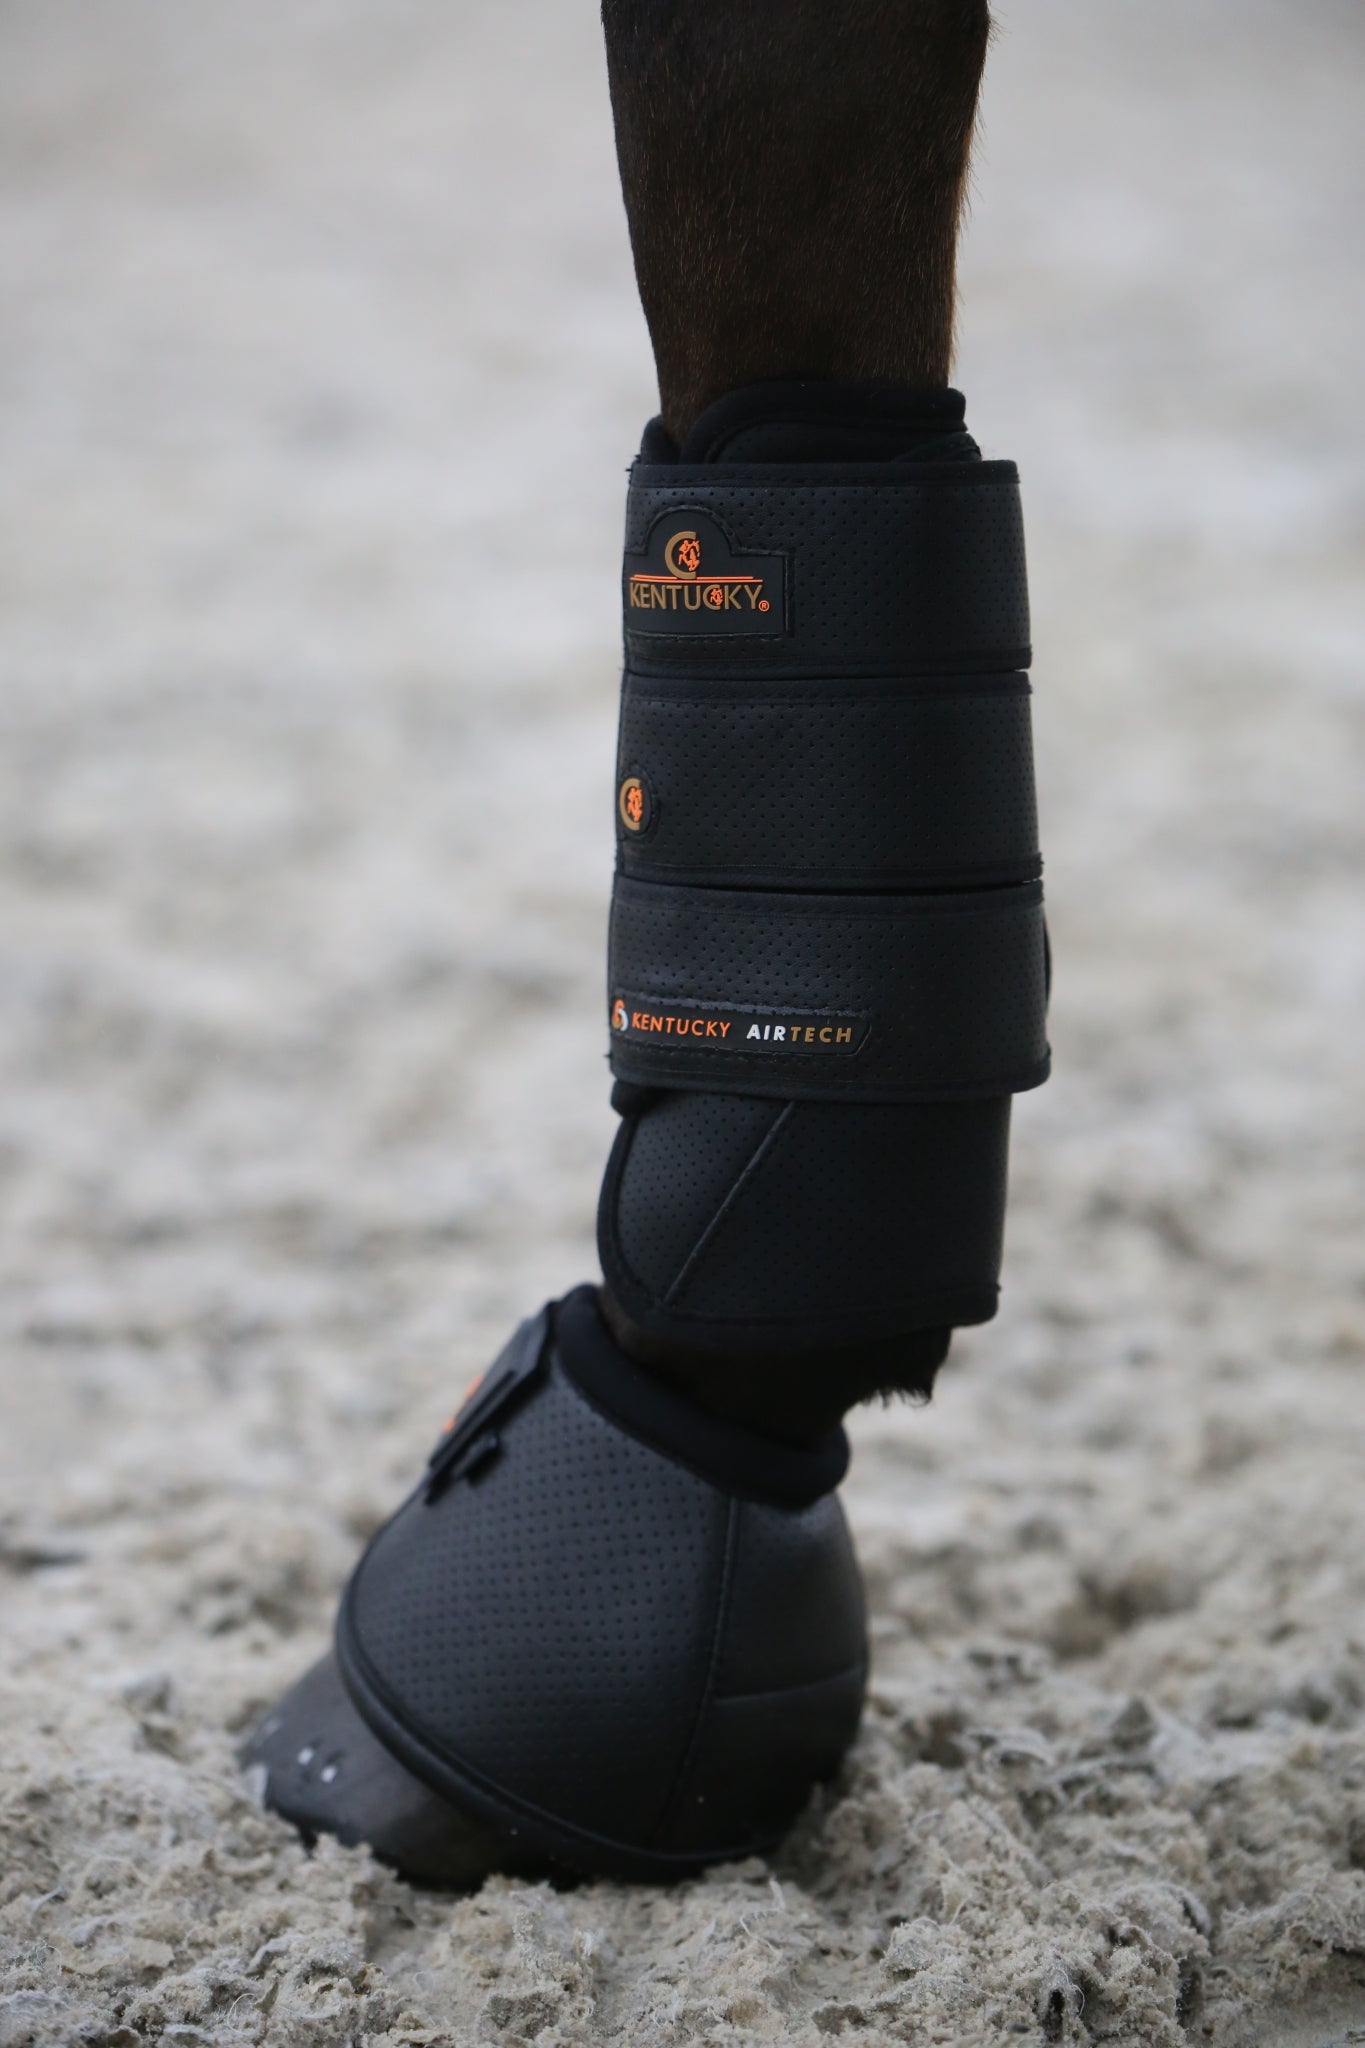 The Kentucky Horsewear Air Tech Over Reach Boots offer vital protection for your horse. Made with shock absorbing gel these are perfect procreation for your horse. The Air Tech Over Reach Boots provide excellent shock absorption and protection against over reaches.